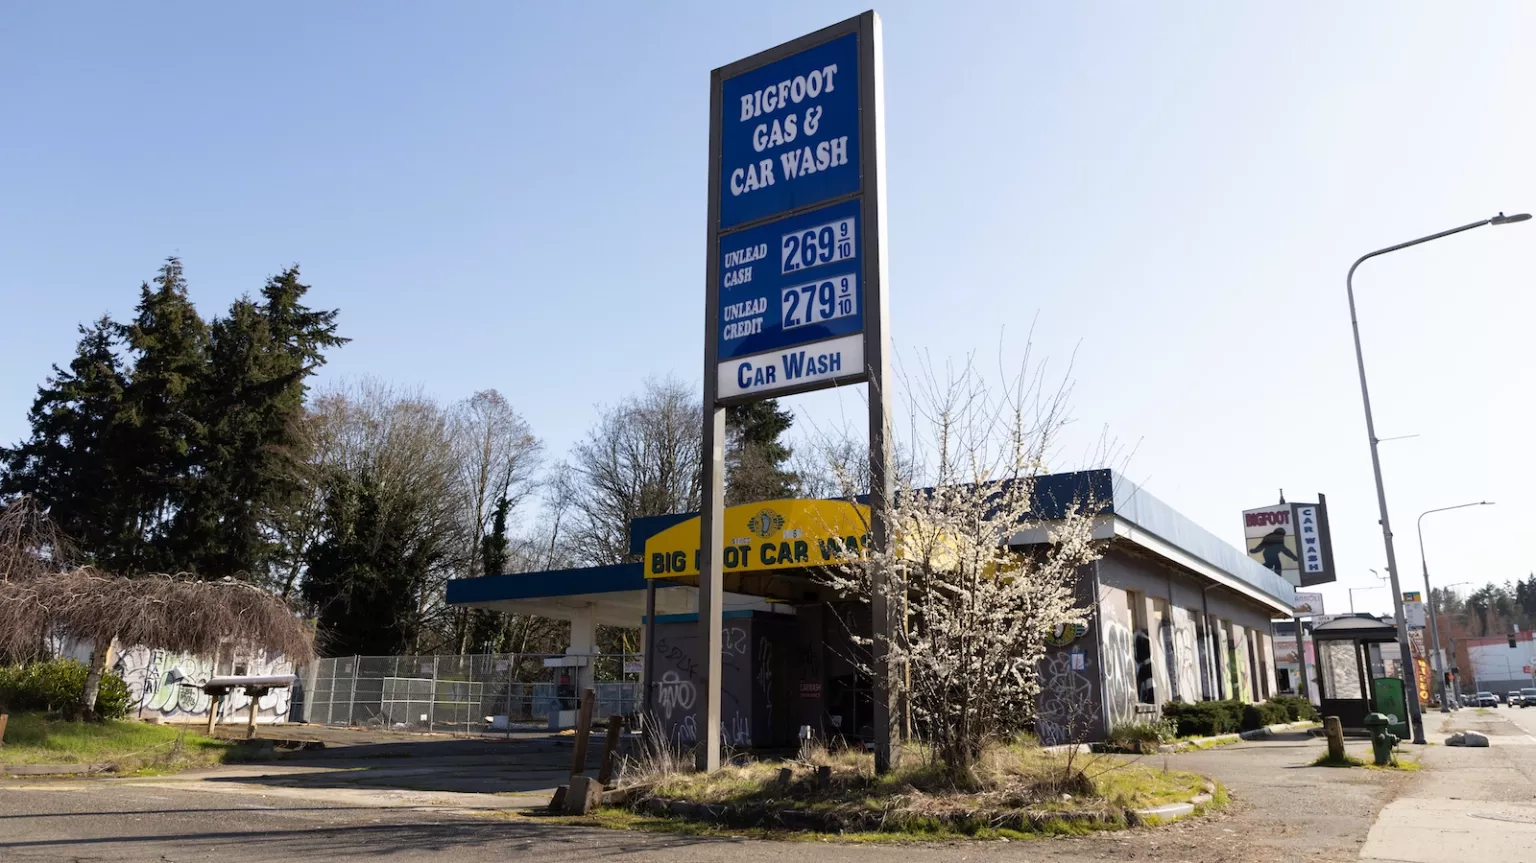 A sign advertises the Bigfoot gas station and car wash.